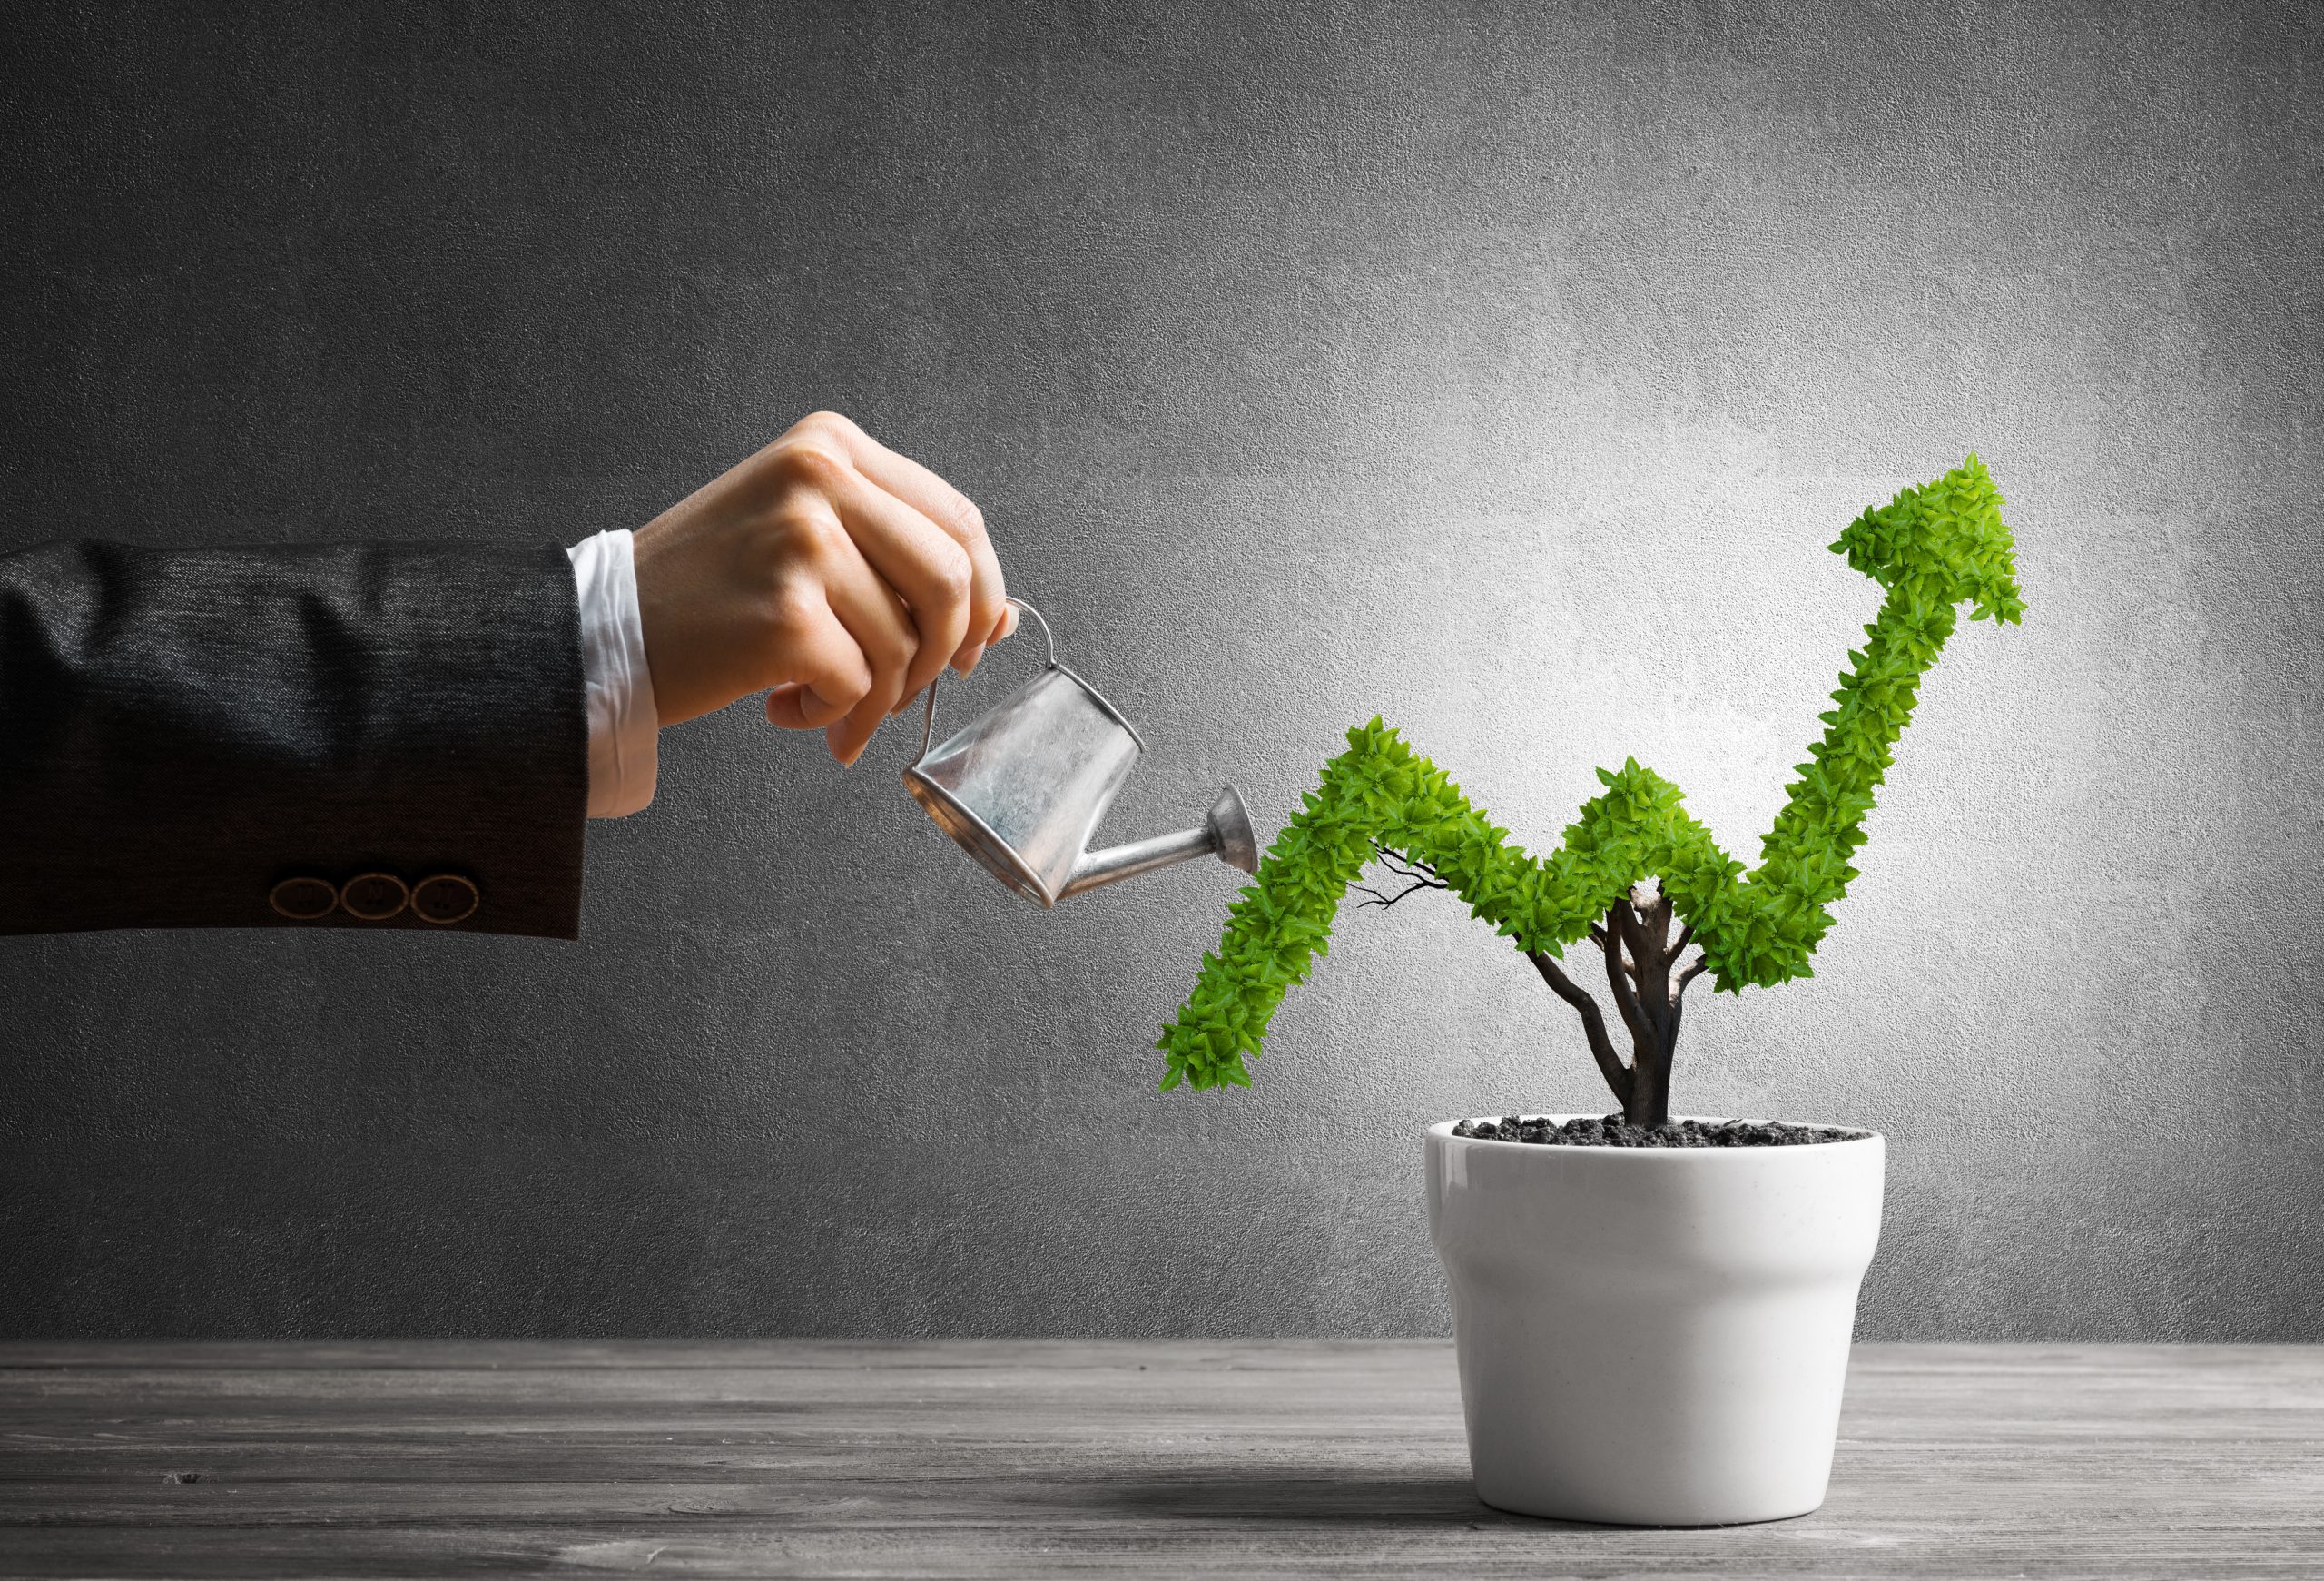 investing in a growth company